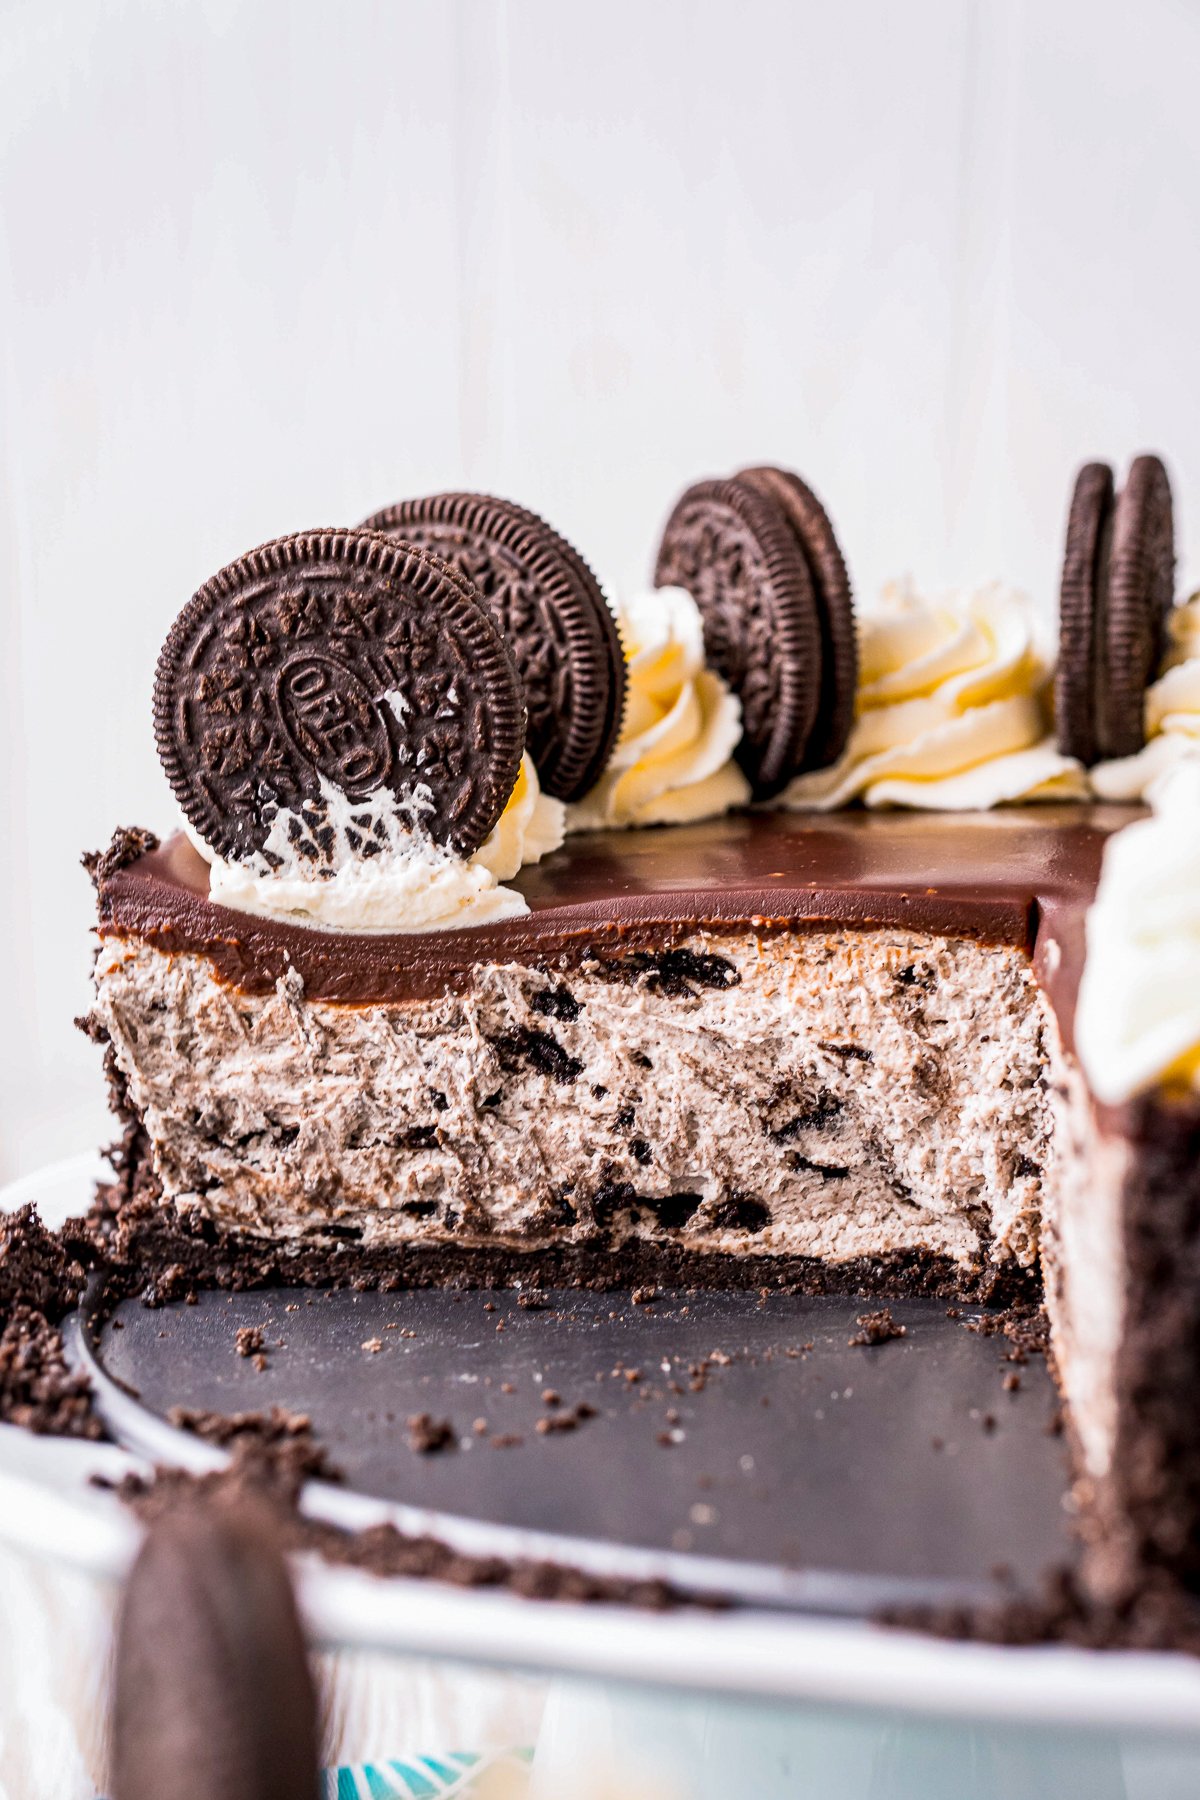 No Bake Oreo Cheesecake on stand with slices taken out showing inside.